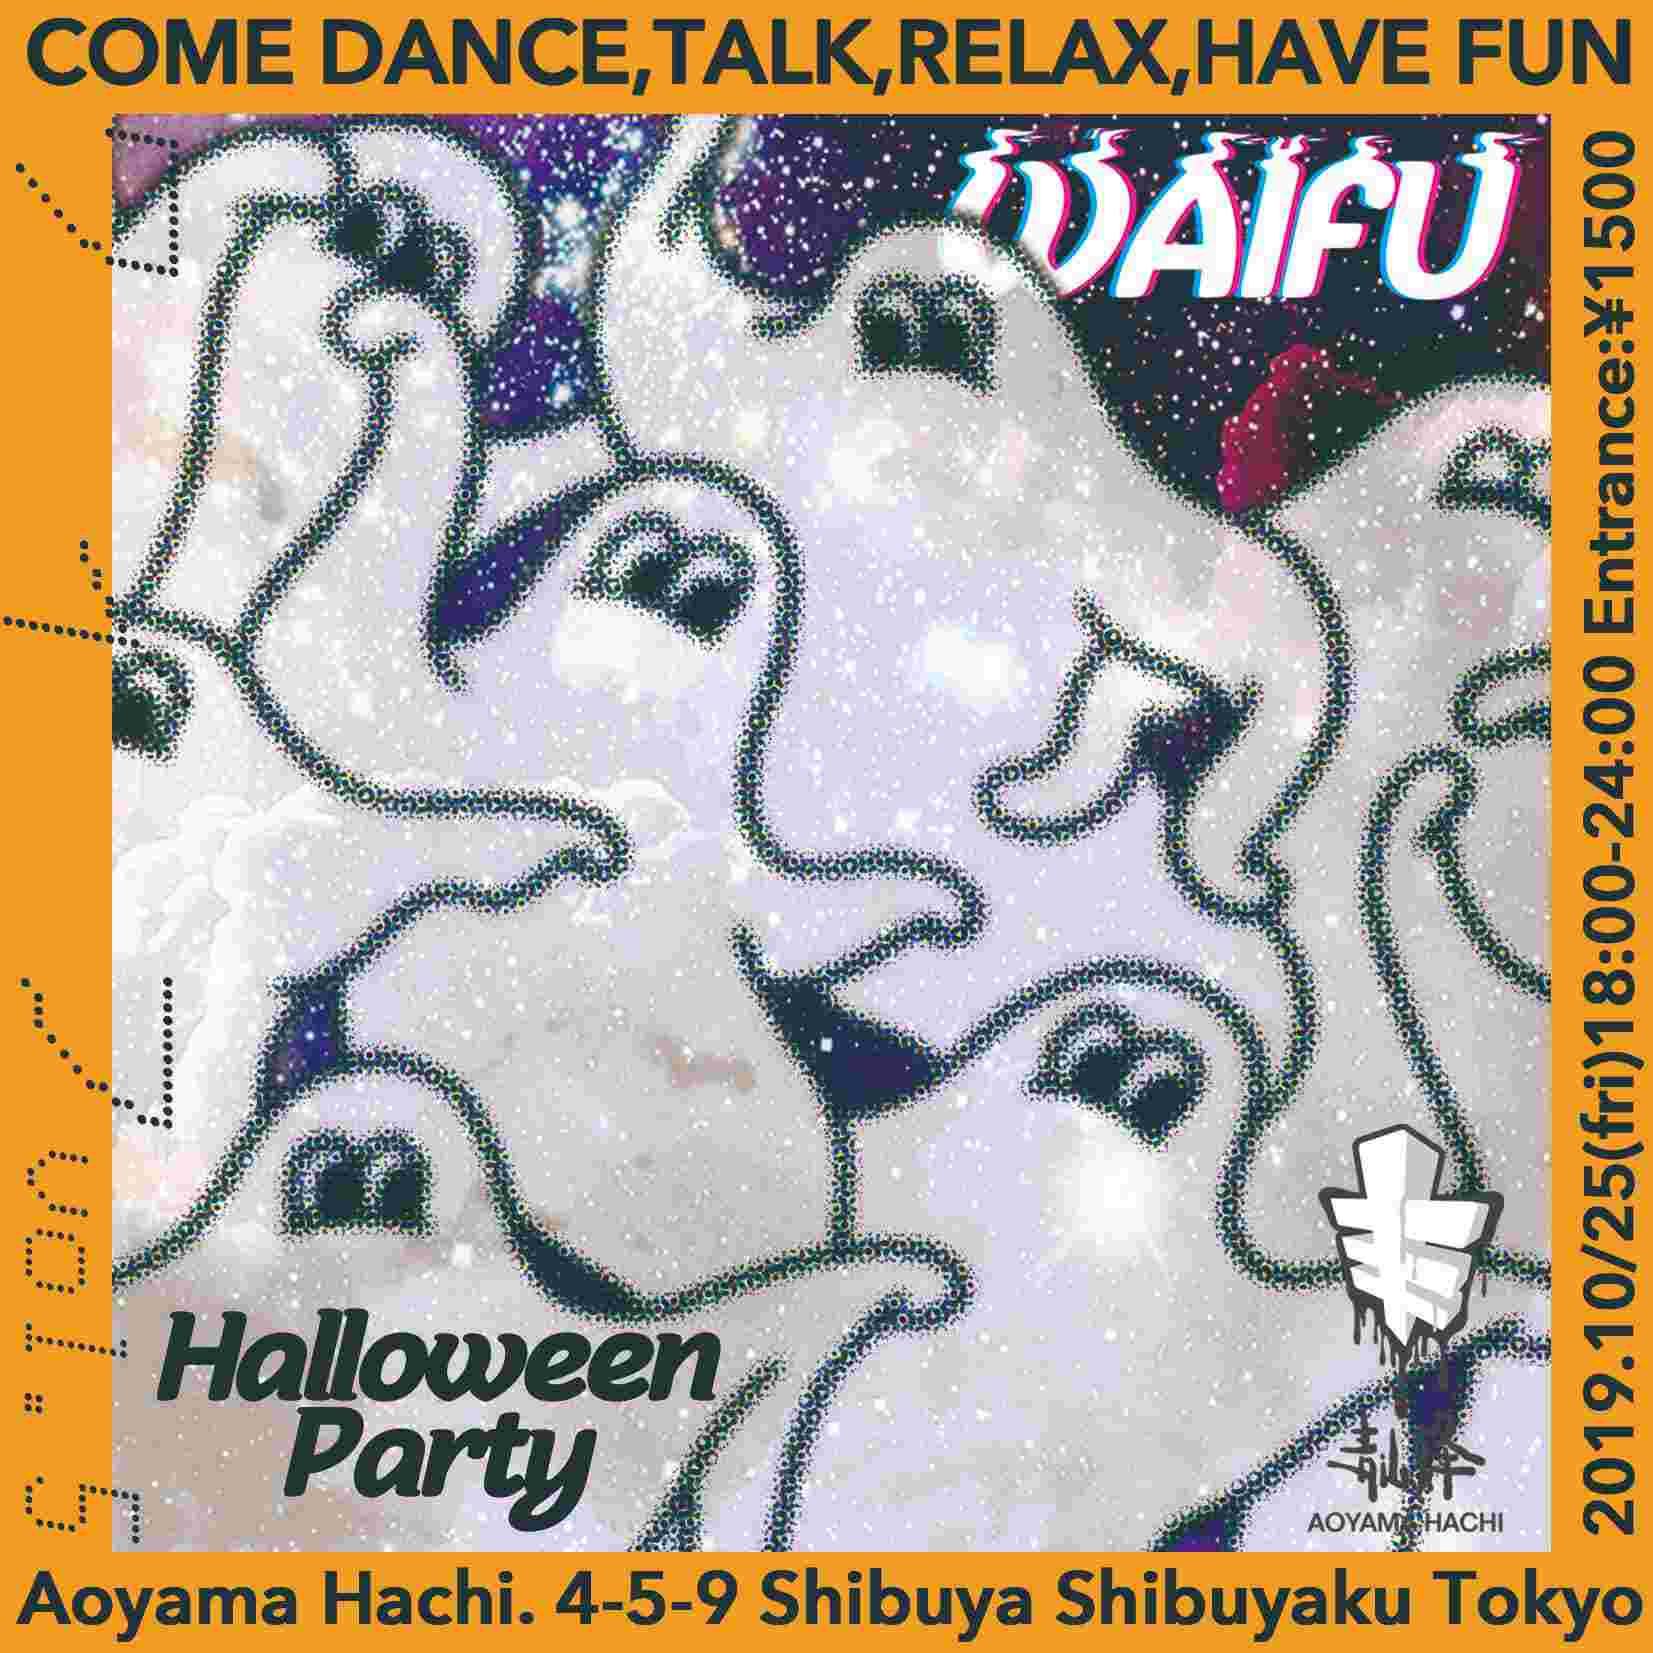 Halloween party will be held at night club “Aoyama Hachi”, for women and LGBTQ+ people